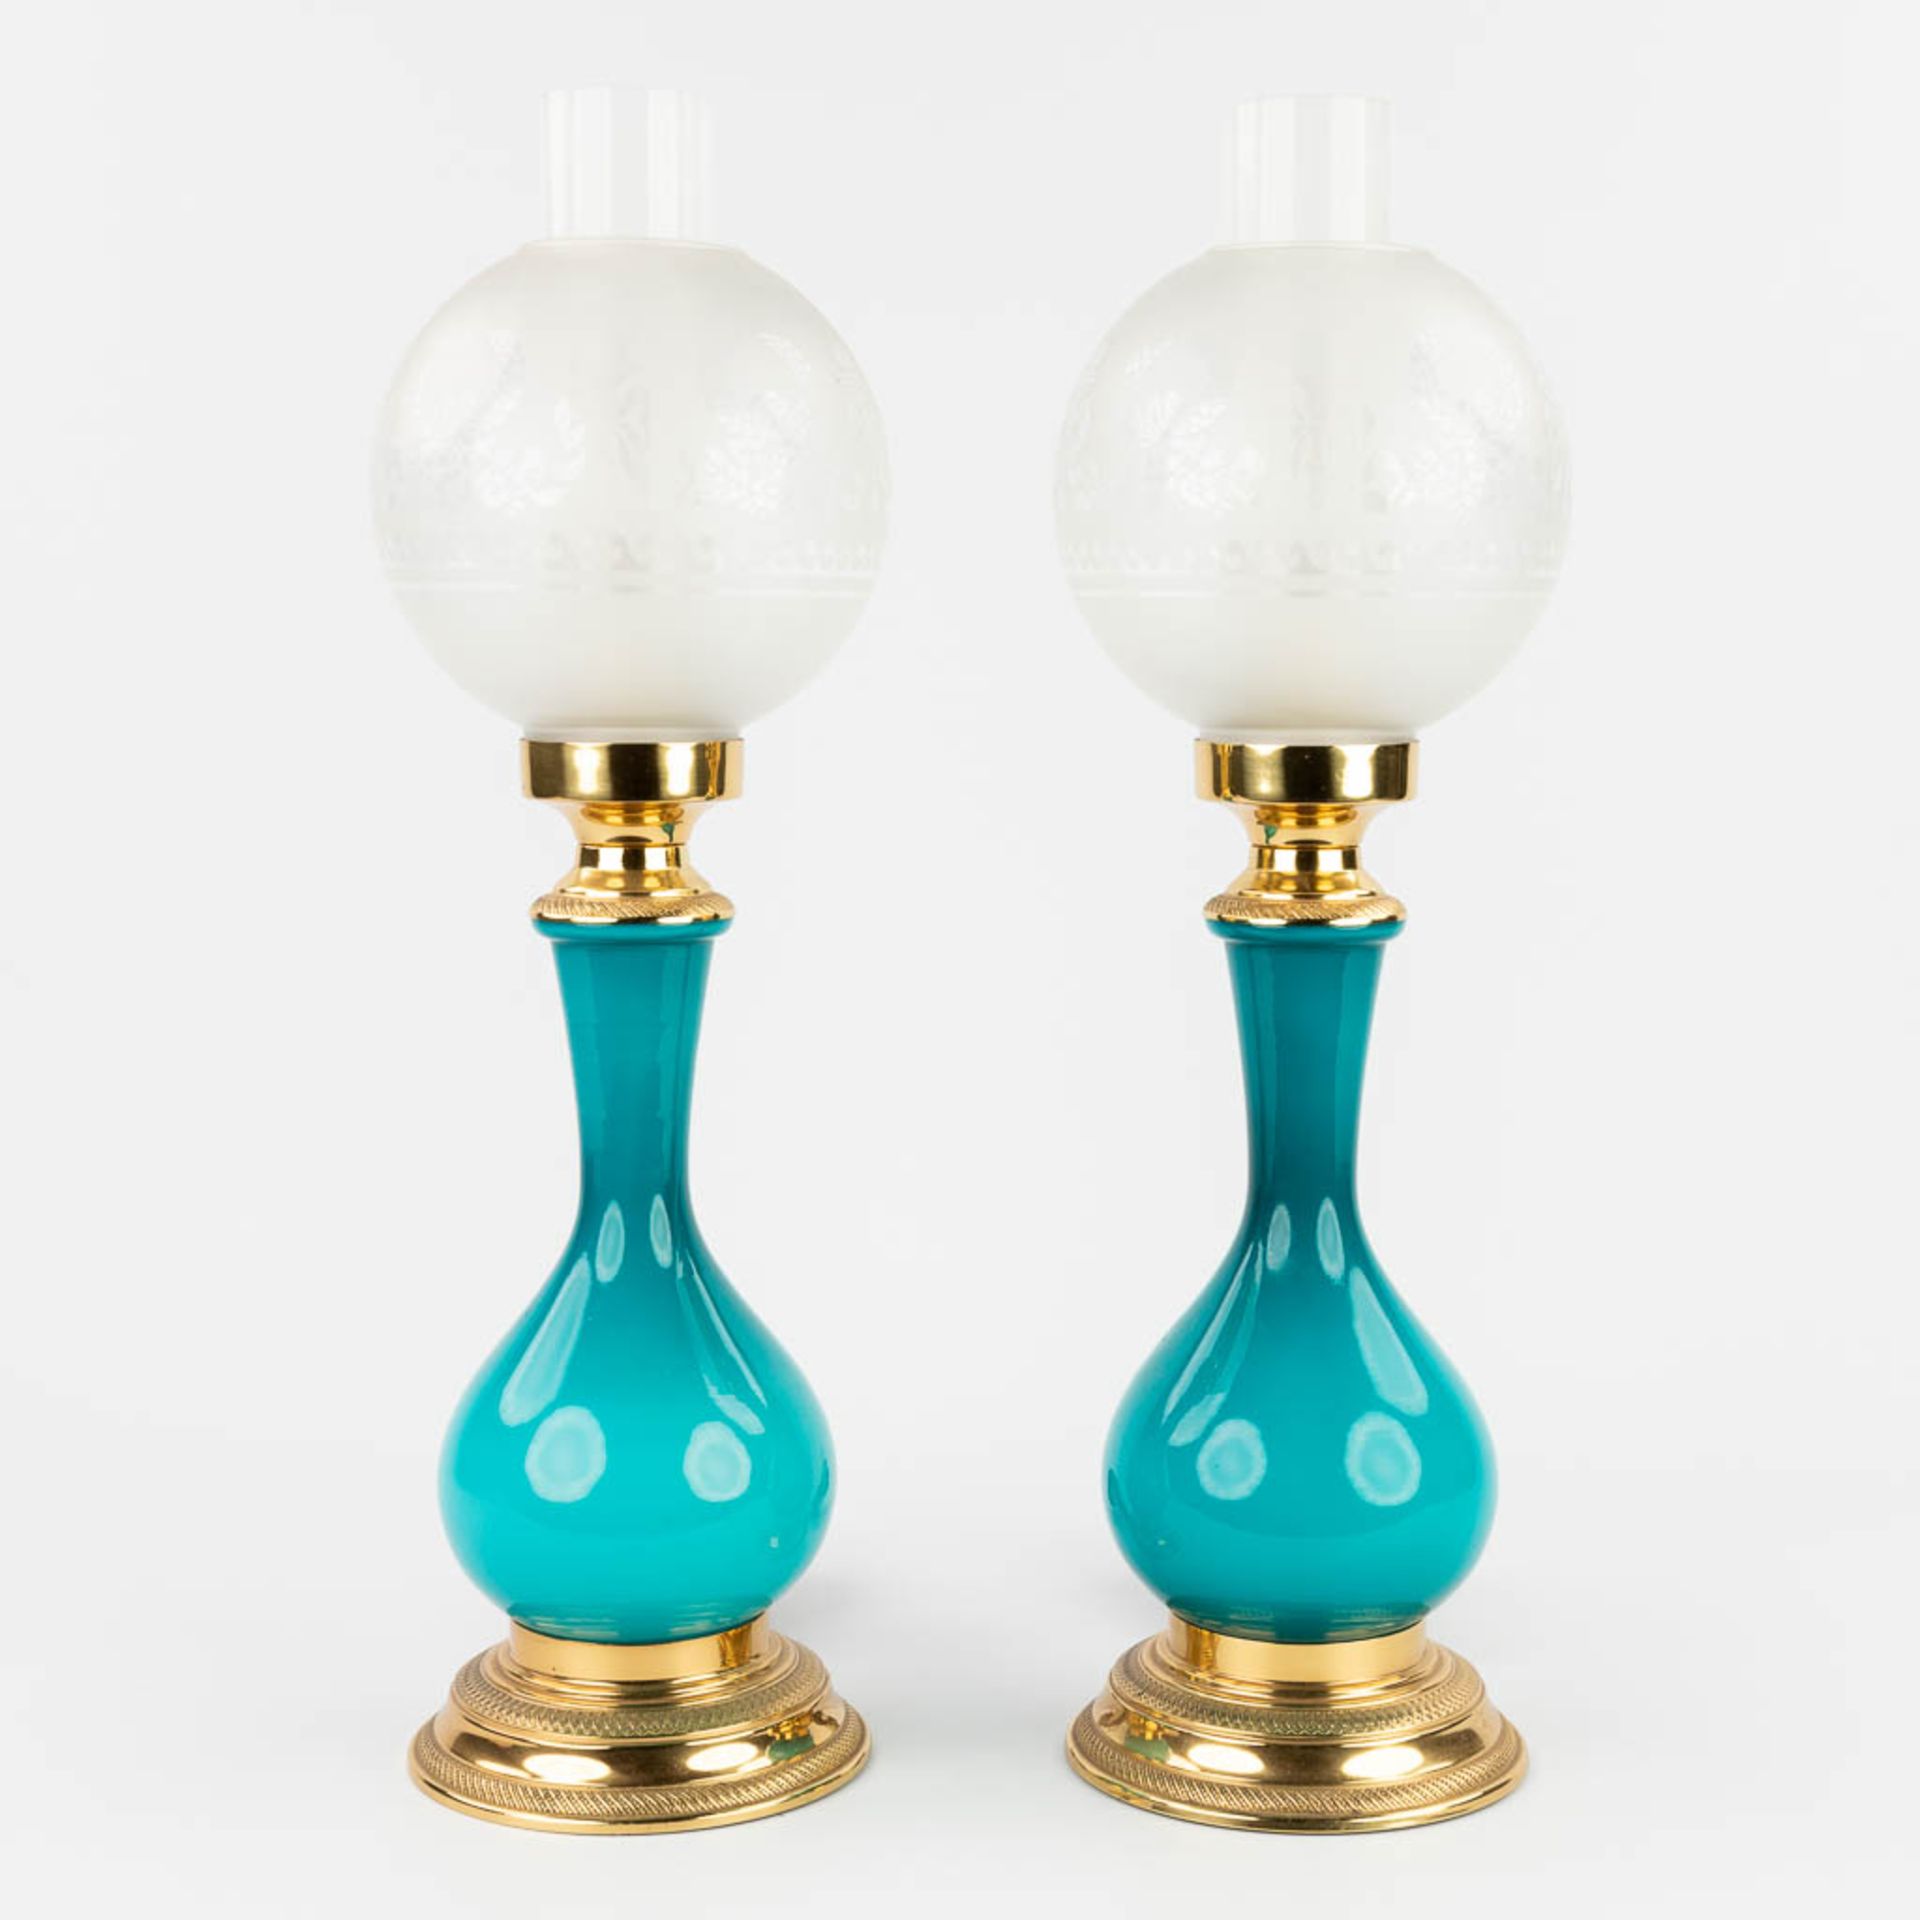 A pair of table lamps, opaline blue glass mounted with bronze. 20th C. (H: 49 x D: 15 cm)